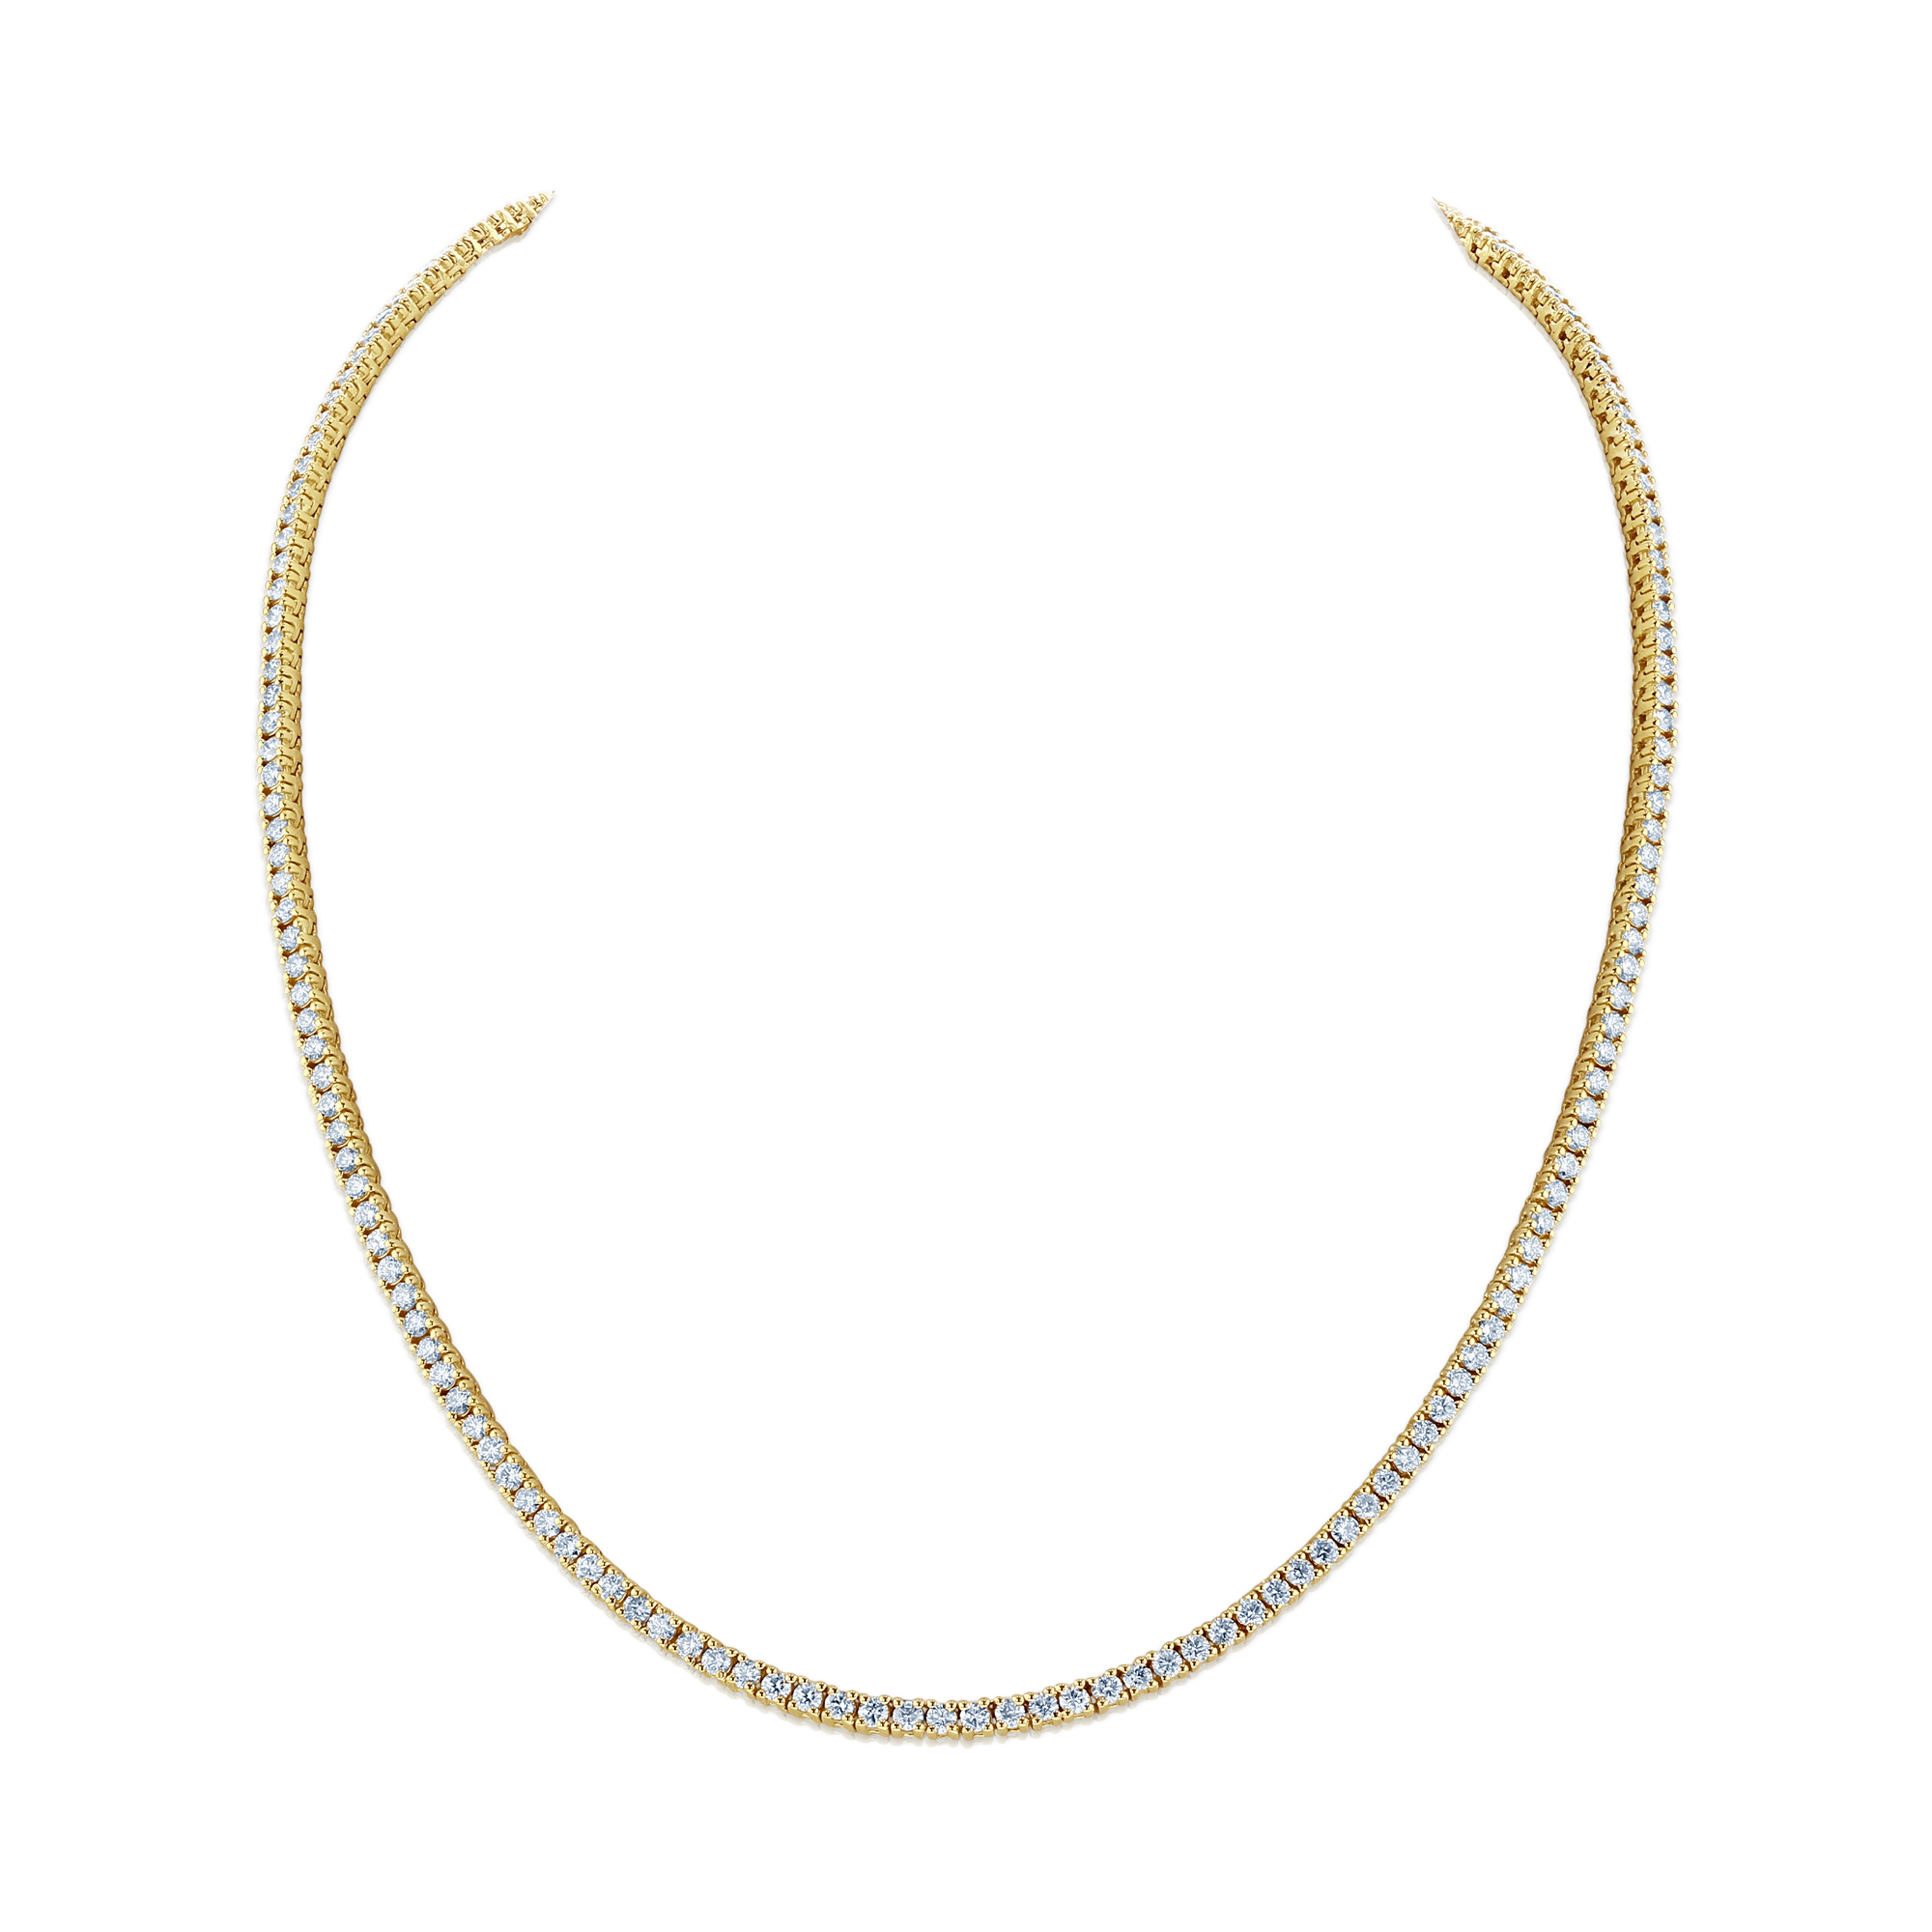 View 9.00ctw Diamond Straight Size Tennis Necklace in 14k Yellow Gold